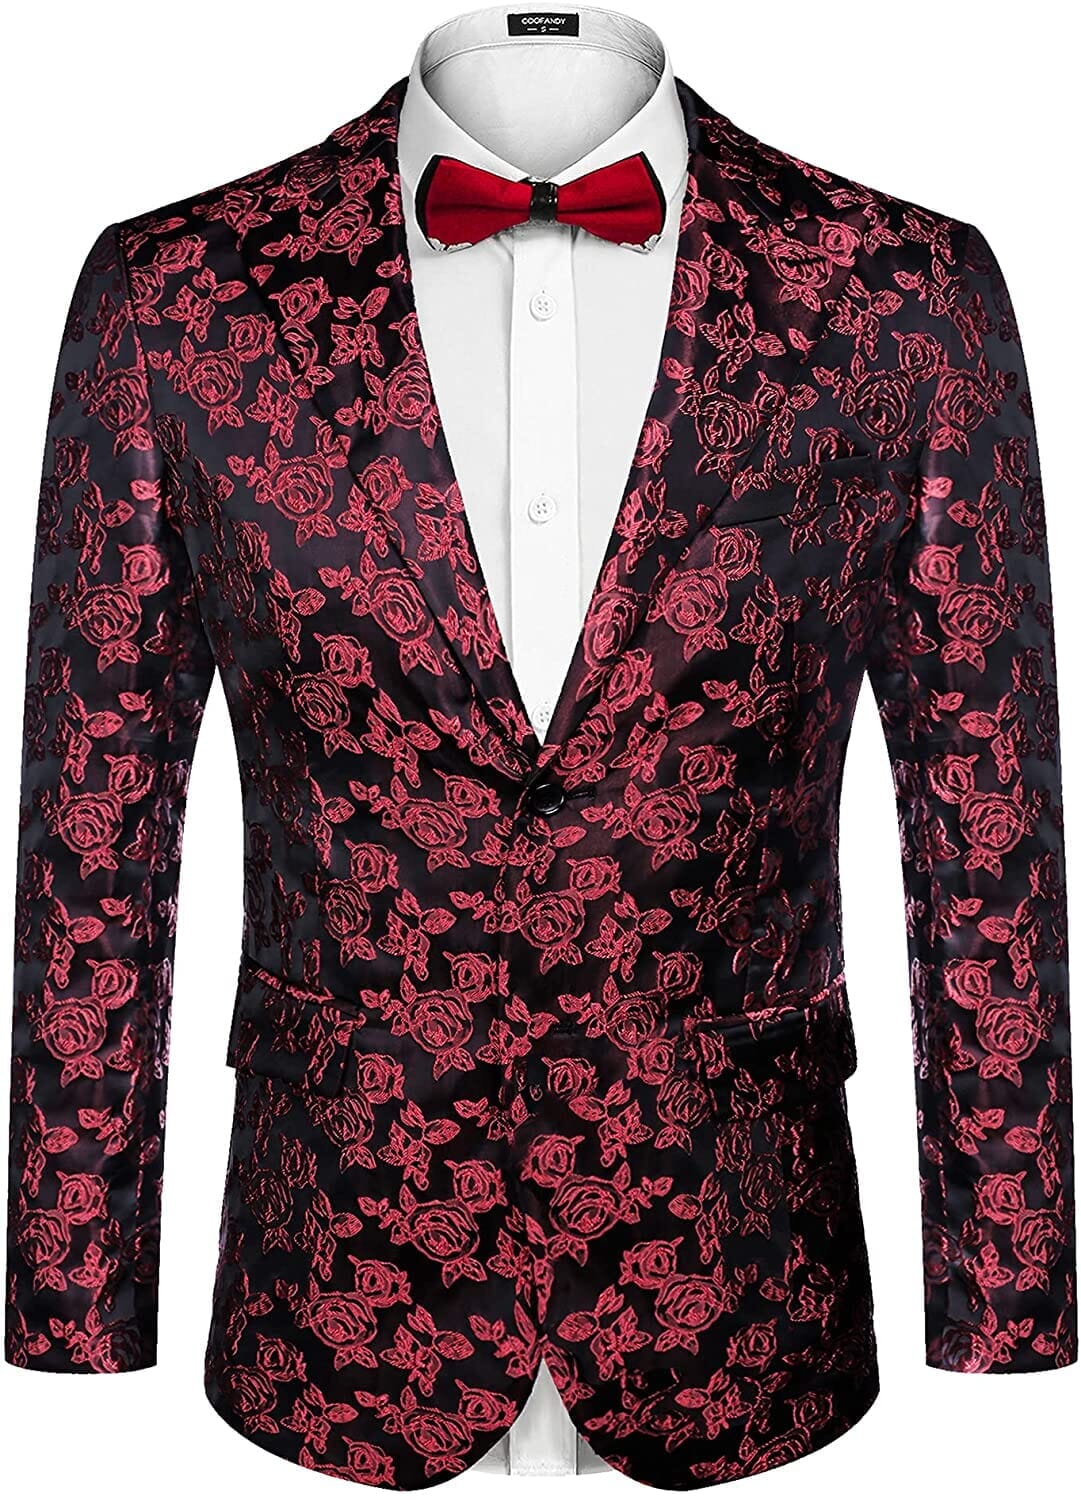 Stylish Rose Embroidered Blazer for a Classy Look | US Only – coofandy